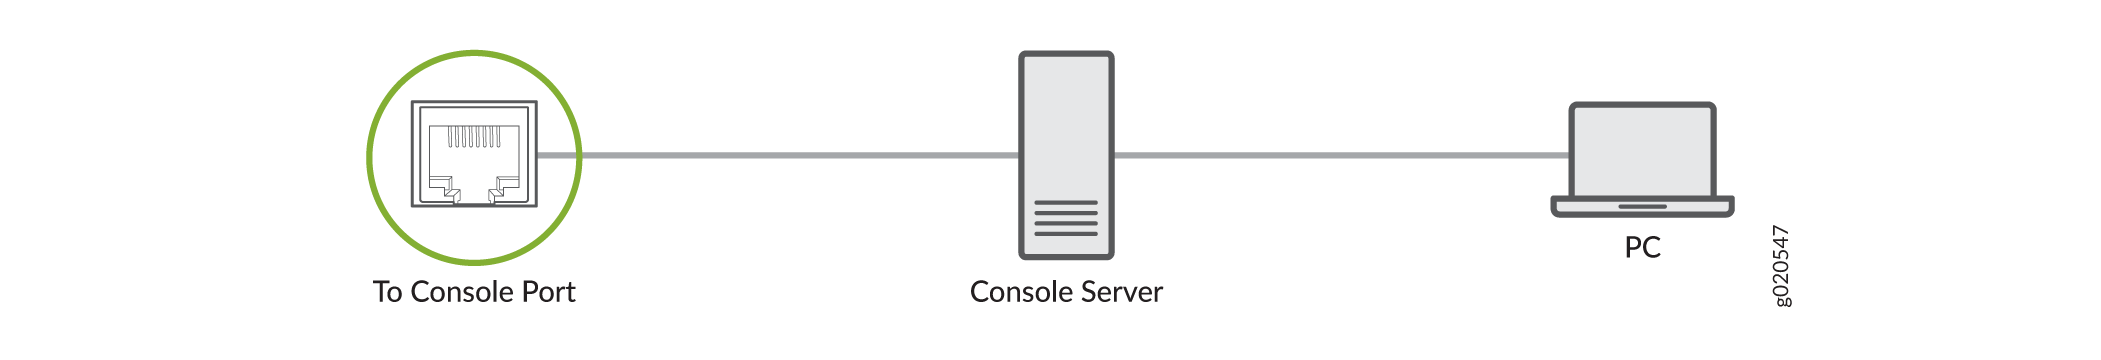 Connecting the ACX7100-48L Router to a Management Console Through a Console Server